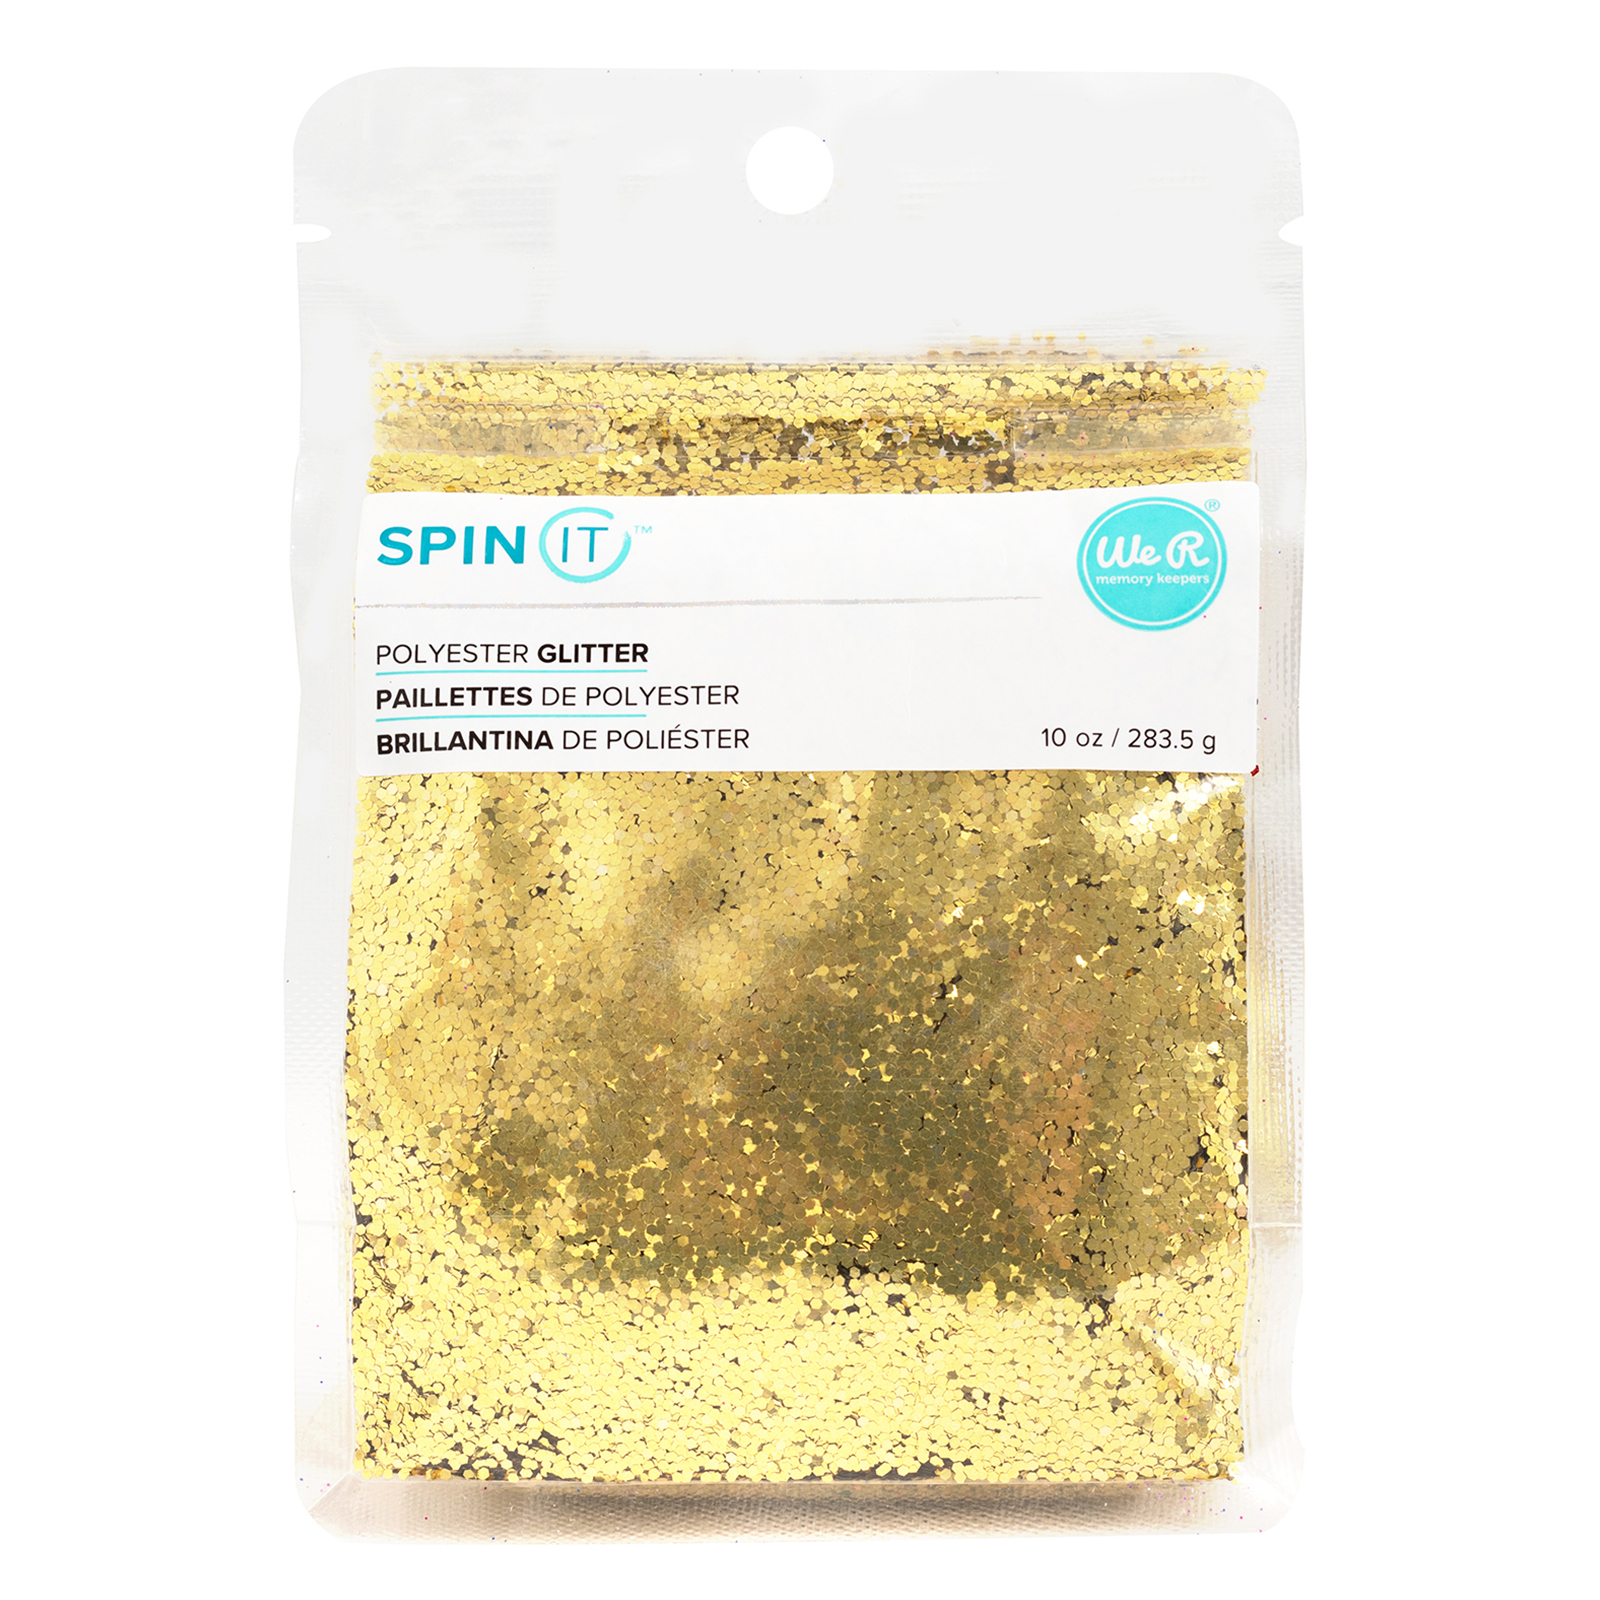 We R Makers • Spin IT super chunky glitter Gold